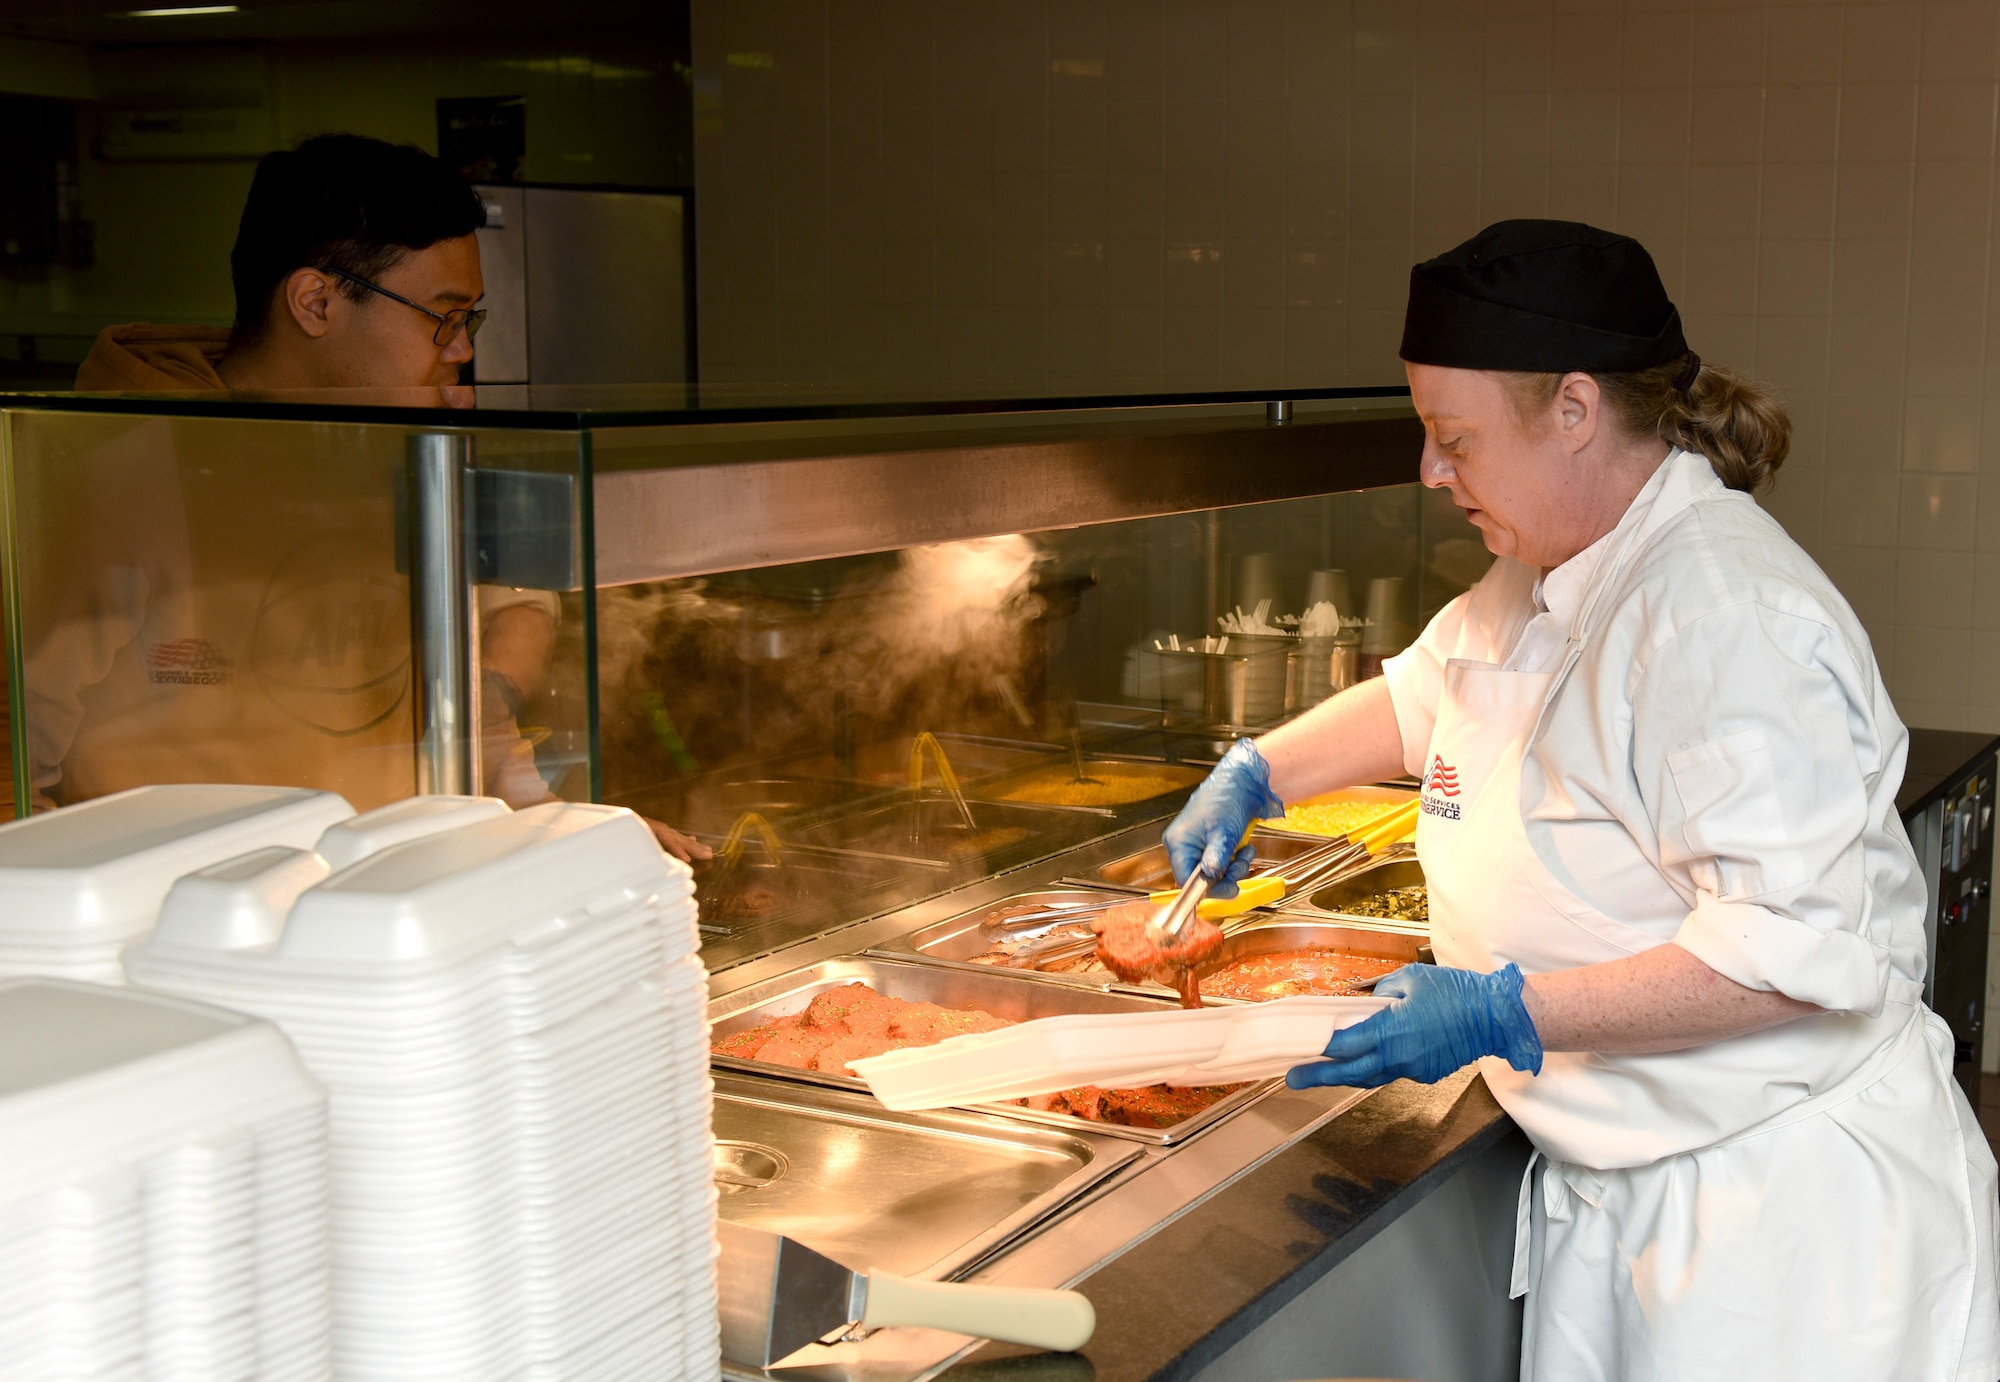 Tammy Halls, 100th Force Support Squadron Gateway Dining Facility cook, prepares and serves a hot meal to a customer at Royal Air Force Mildenhall, England, March 24, 2022. Staff work in different positions at the DFAC to give them an experience in a wide variety of duties. (U.S. Air Force photo by Karen Abeyasekere)